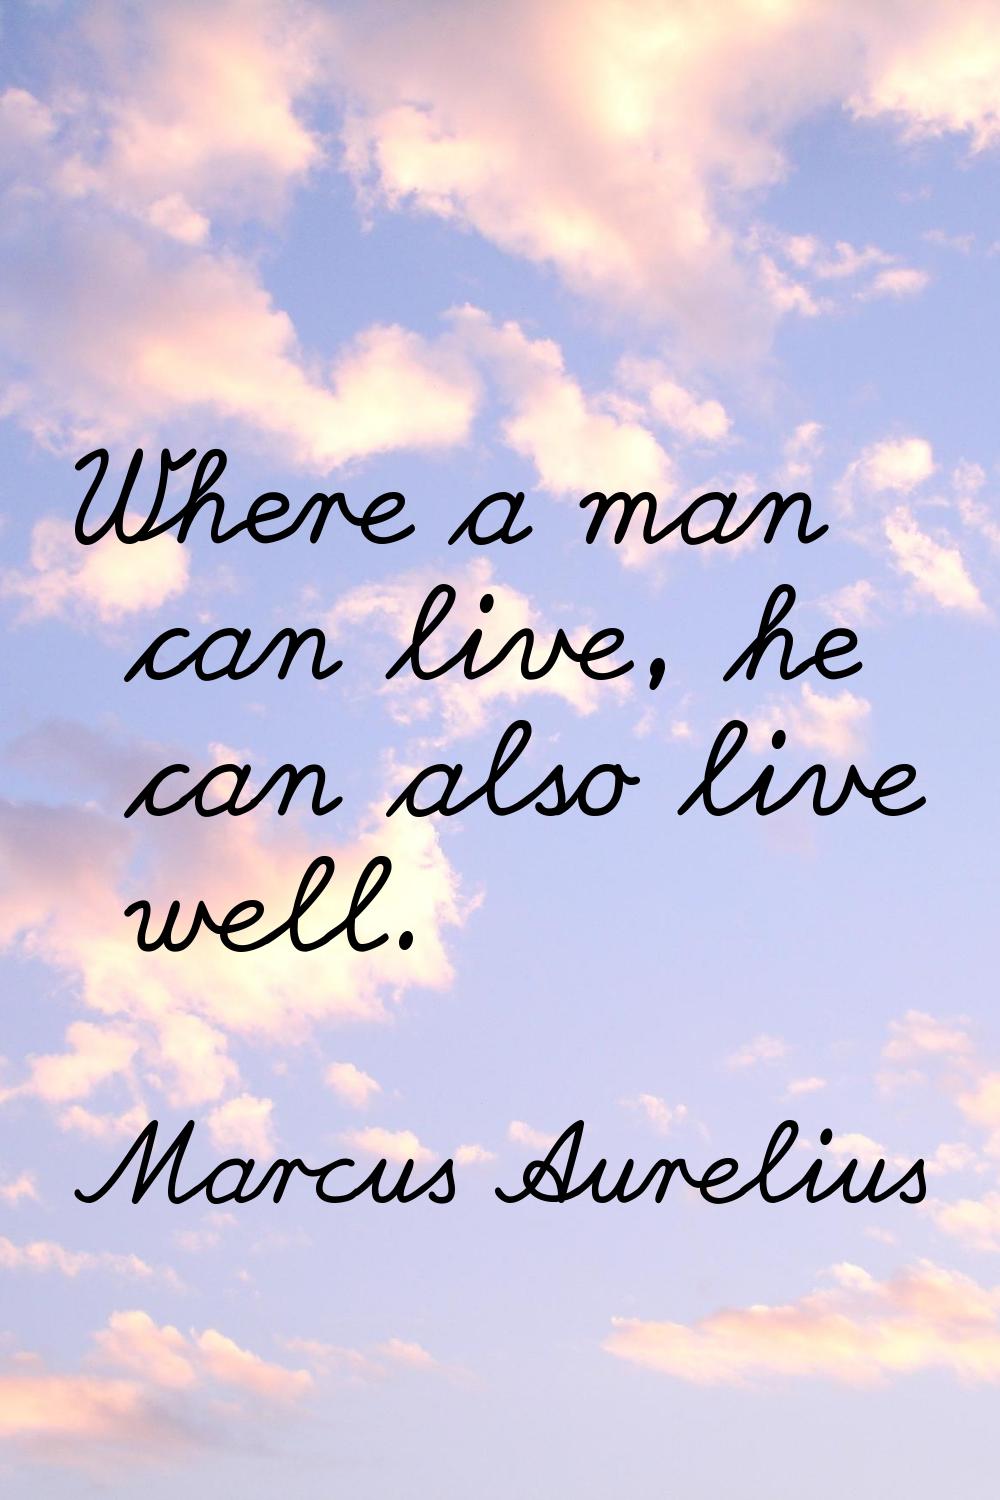 Where a man can live, he can also live well.